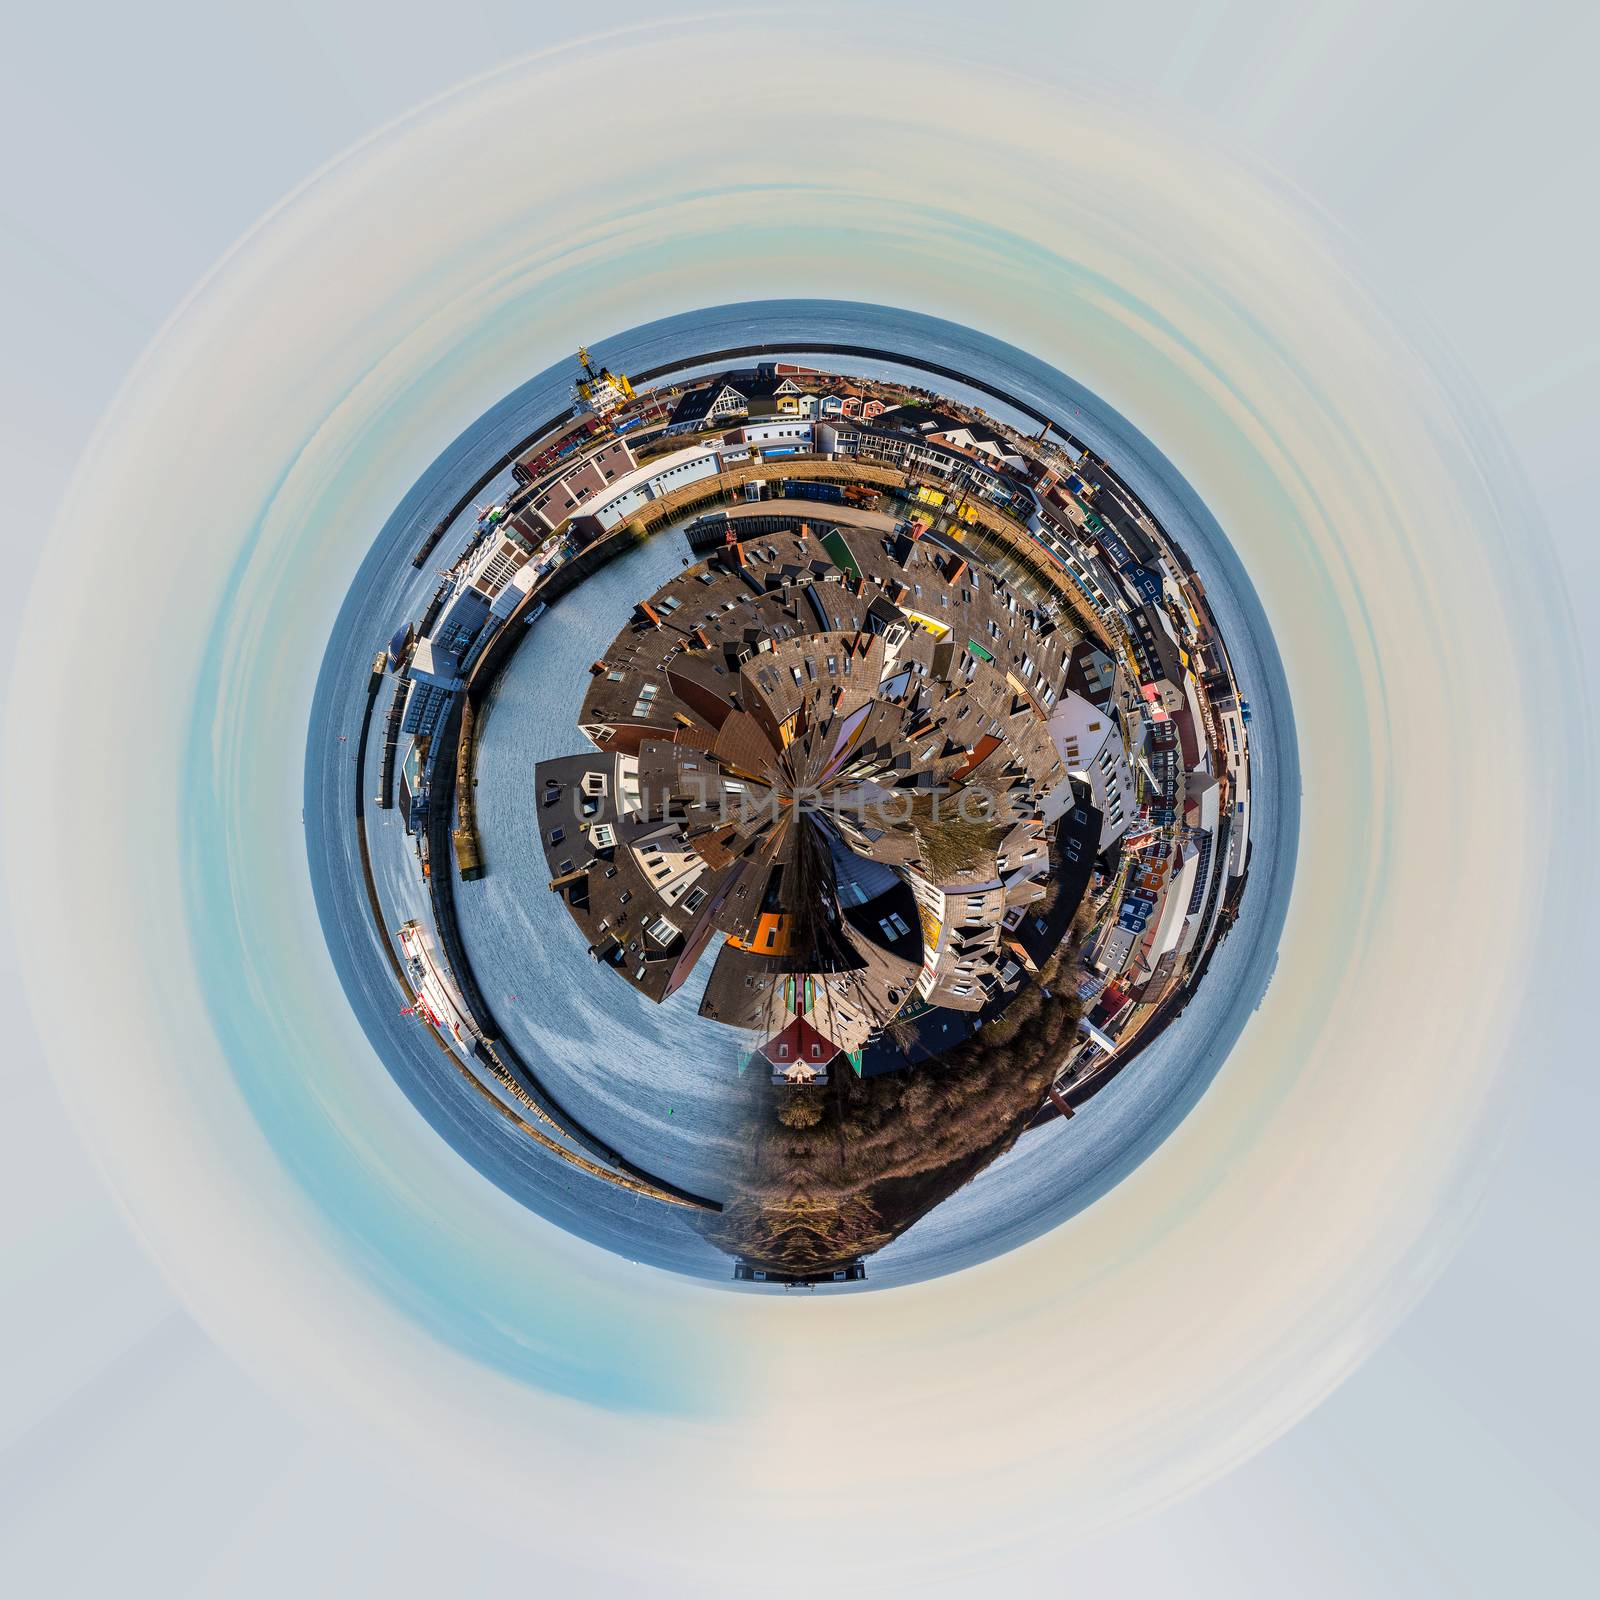 Planet of colored Crab fisher hutches at harbor Island Helgoland, Germany, nordic style houses with boat and blue sky, Little planet city concept. Tiny planet projection